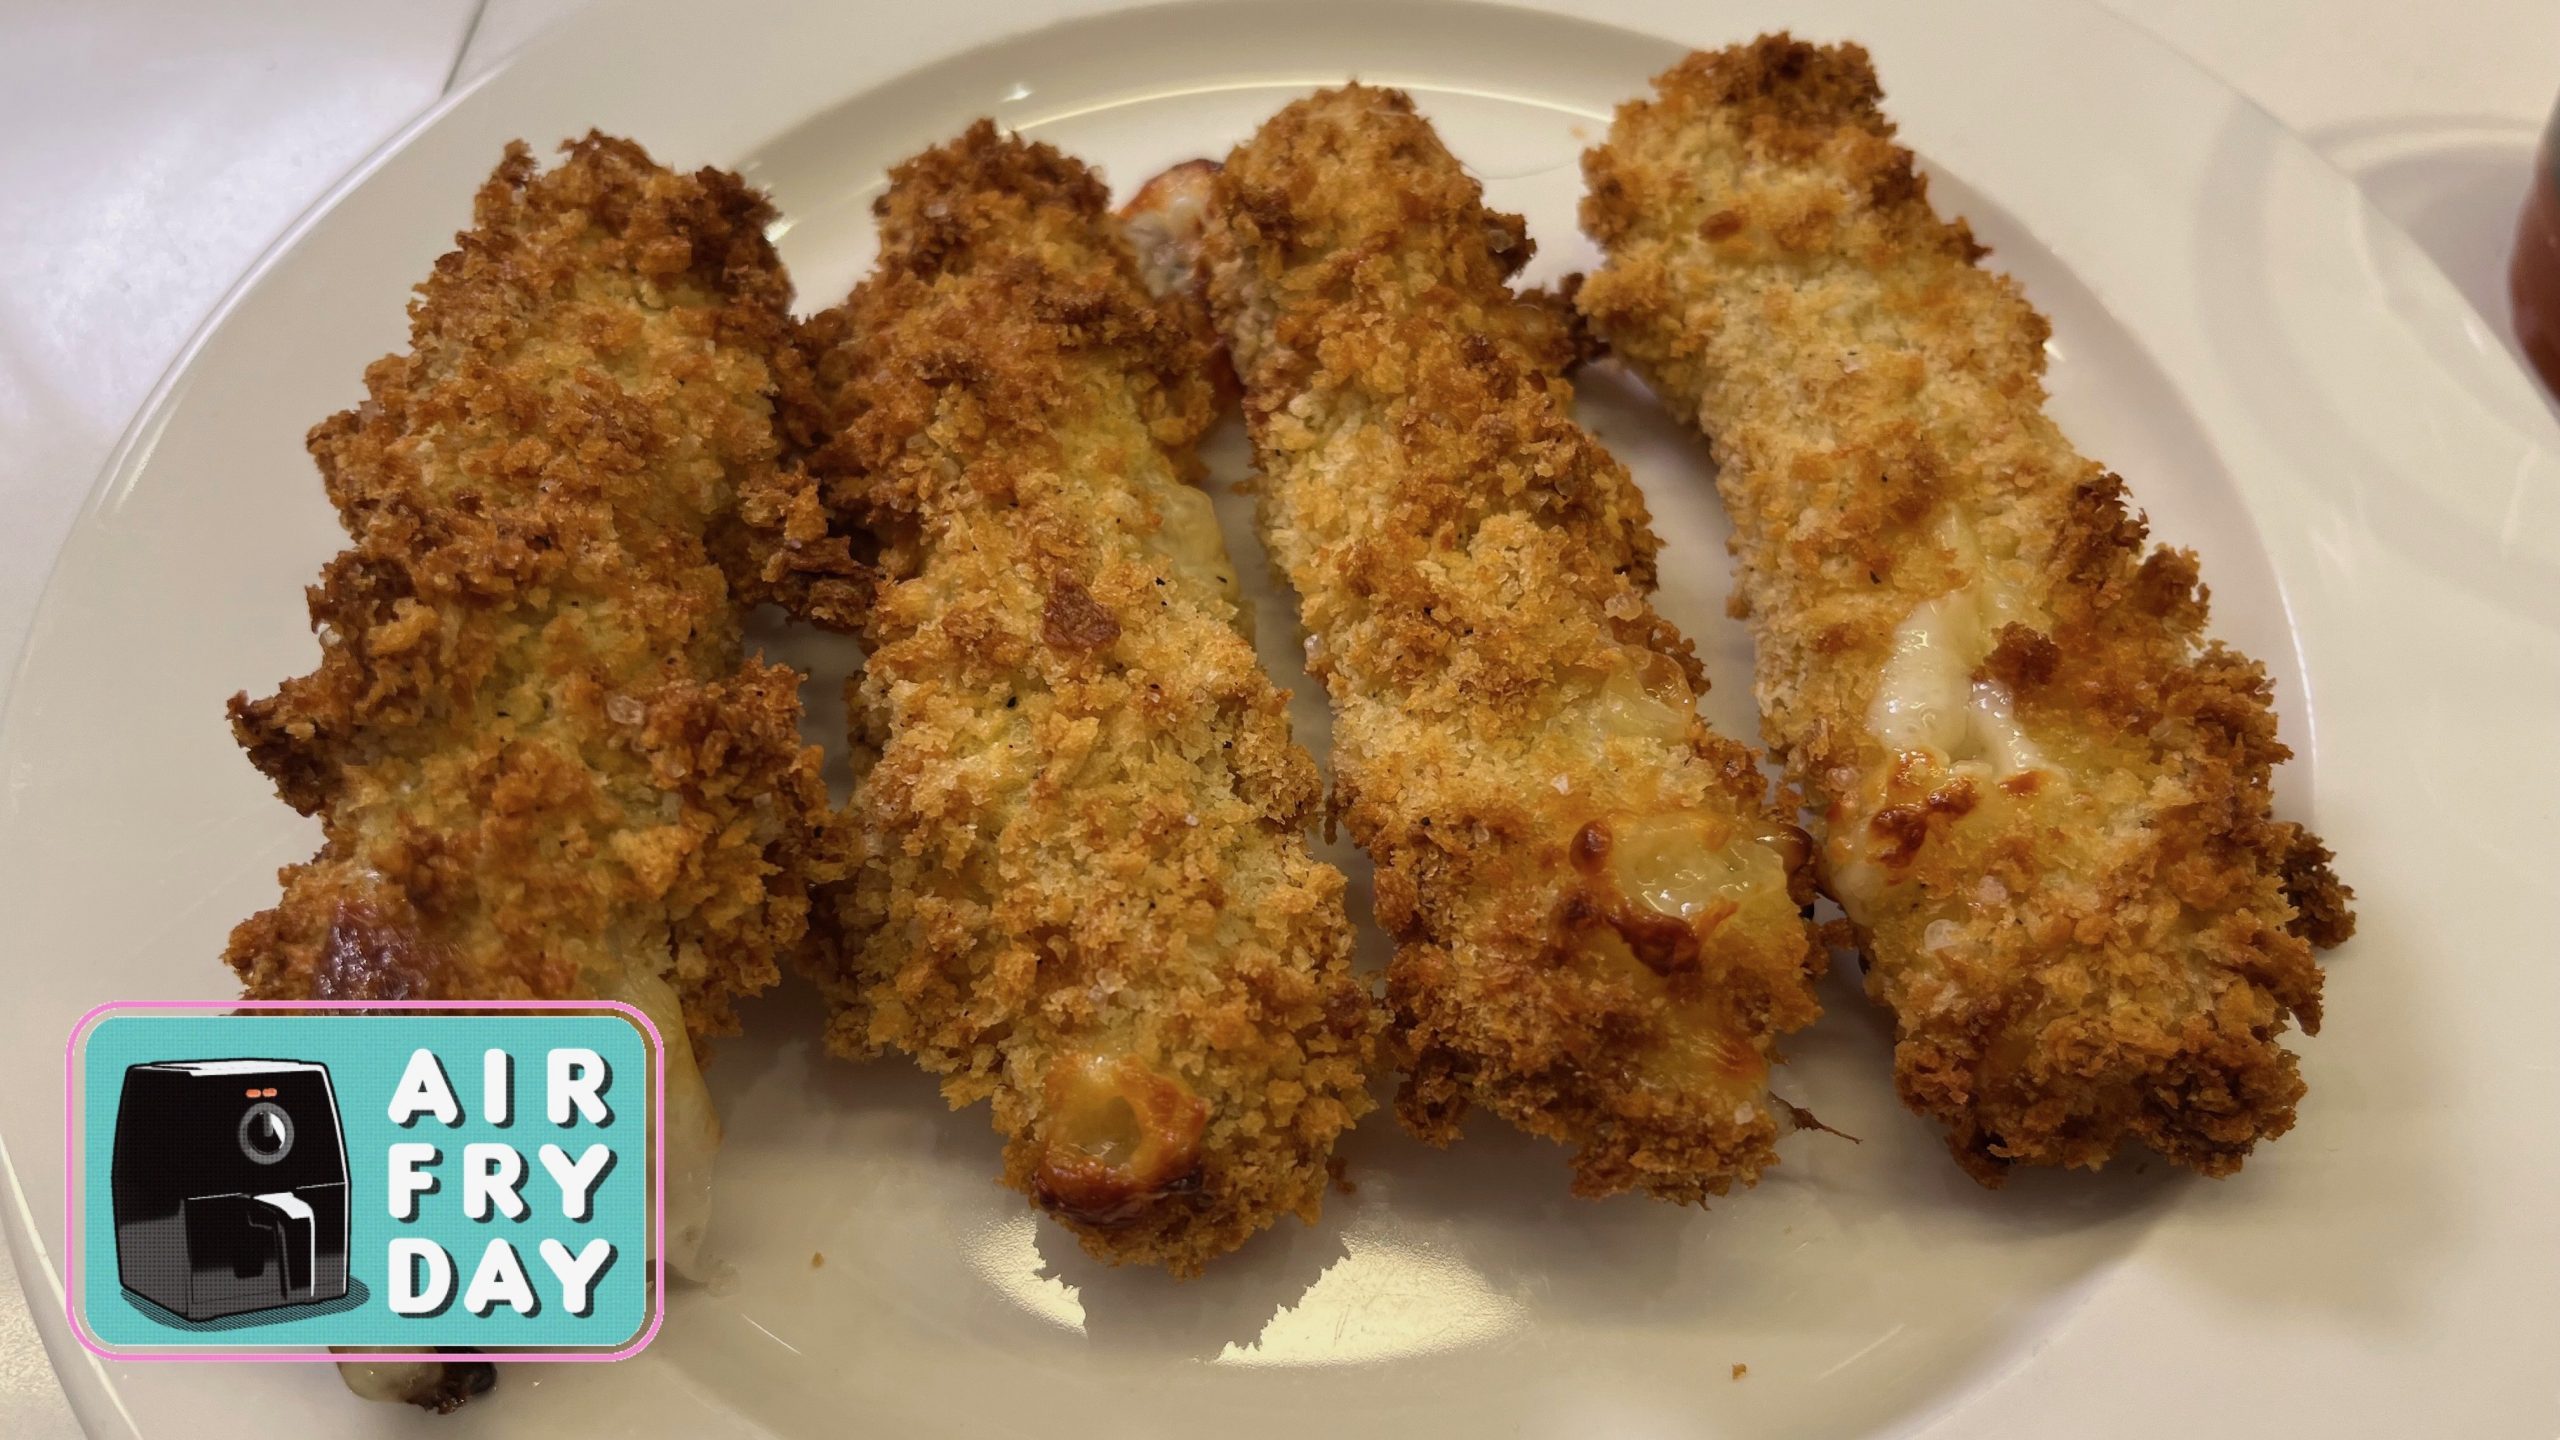 Air fryer mozzarella sticks are tasty and easy to make